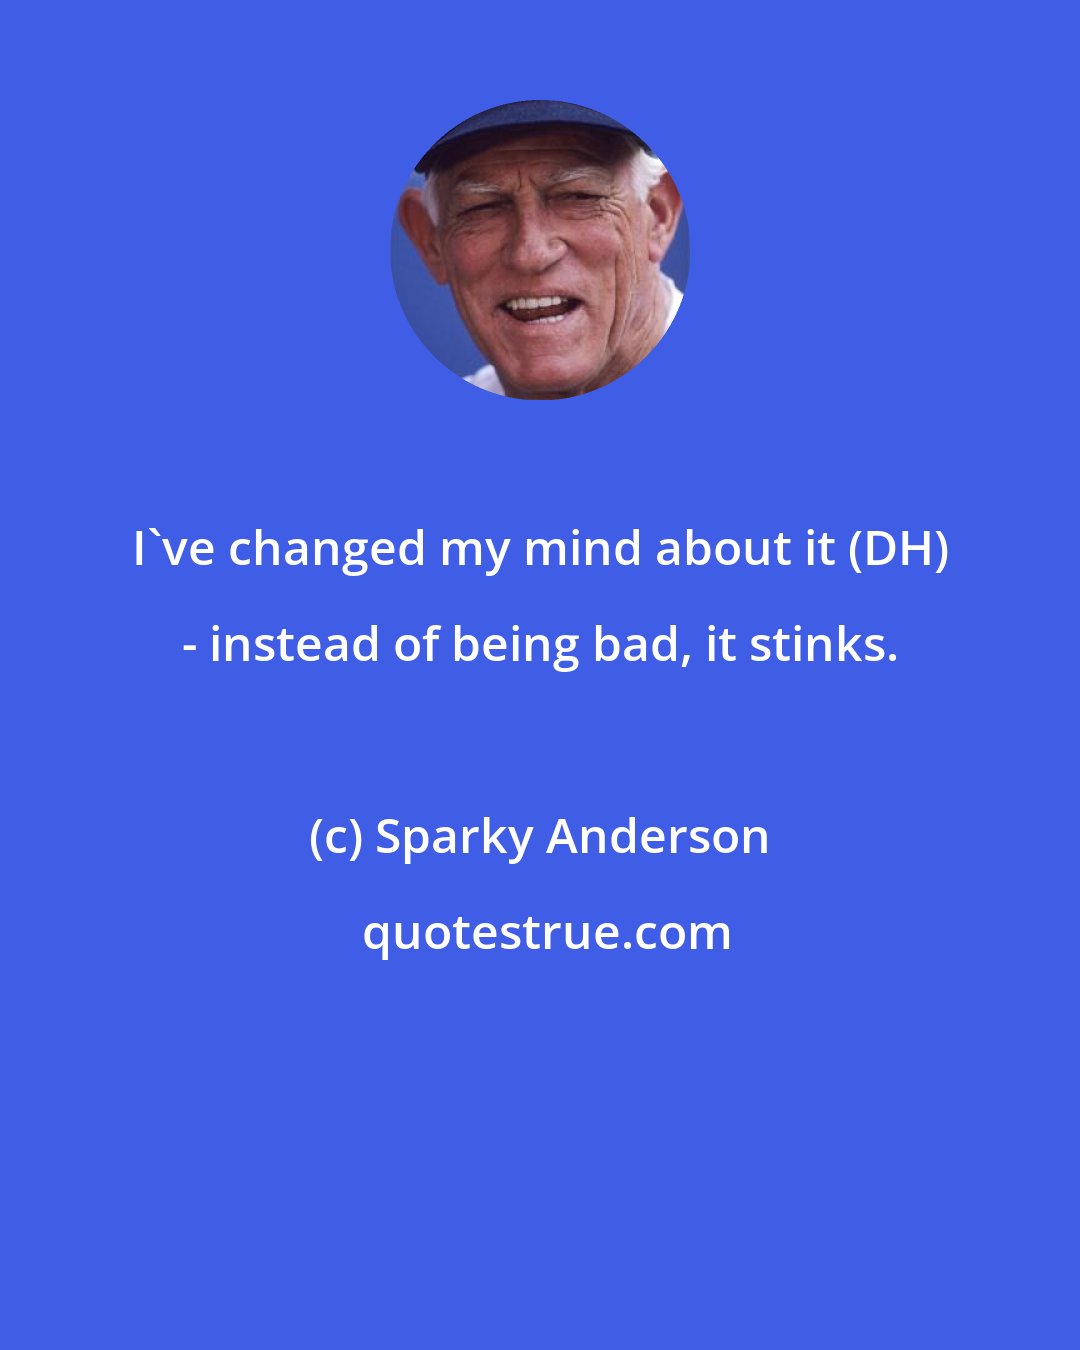 Sparky Anderson: I've changed my mind about it (DH) - instead of being bad, it stinks.